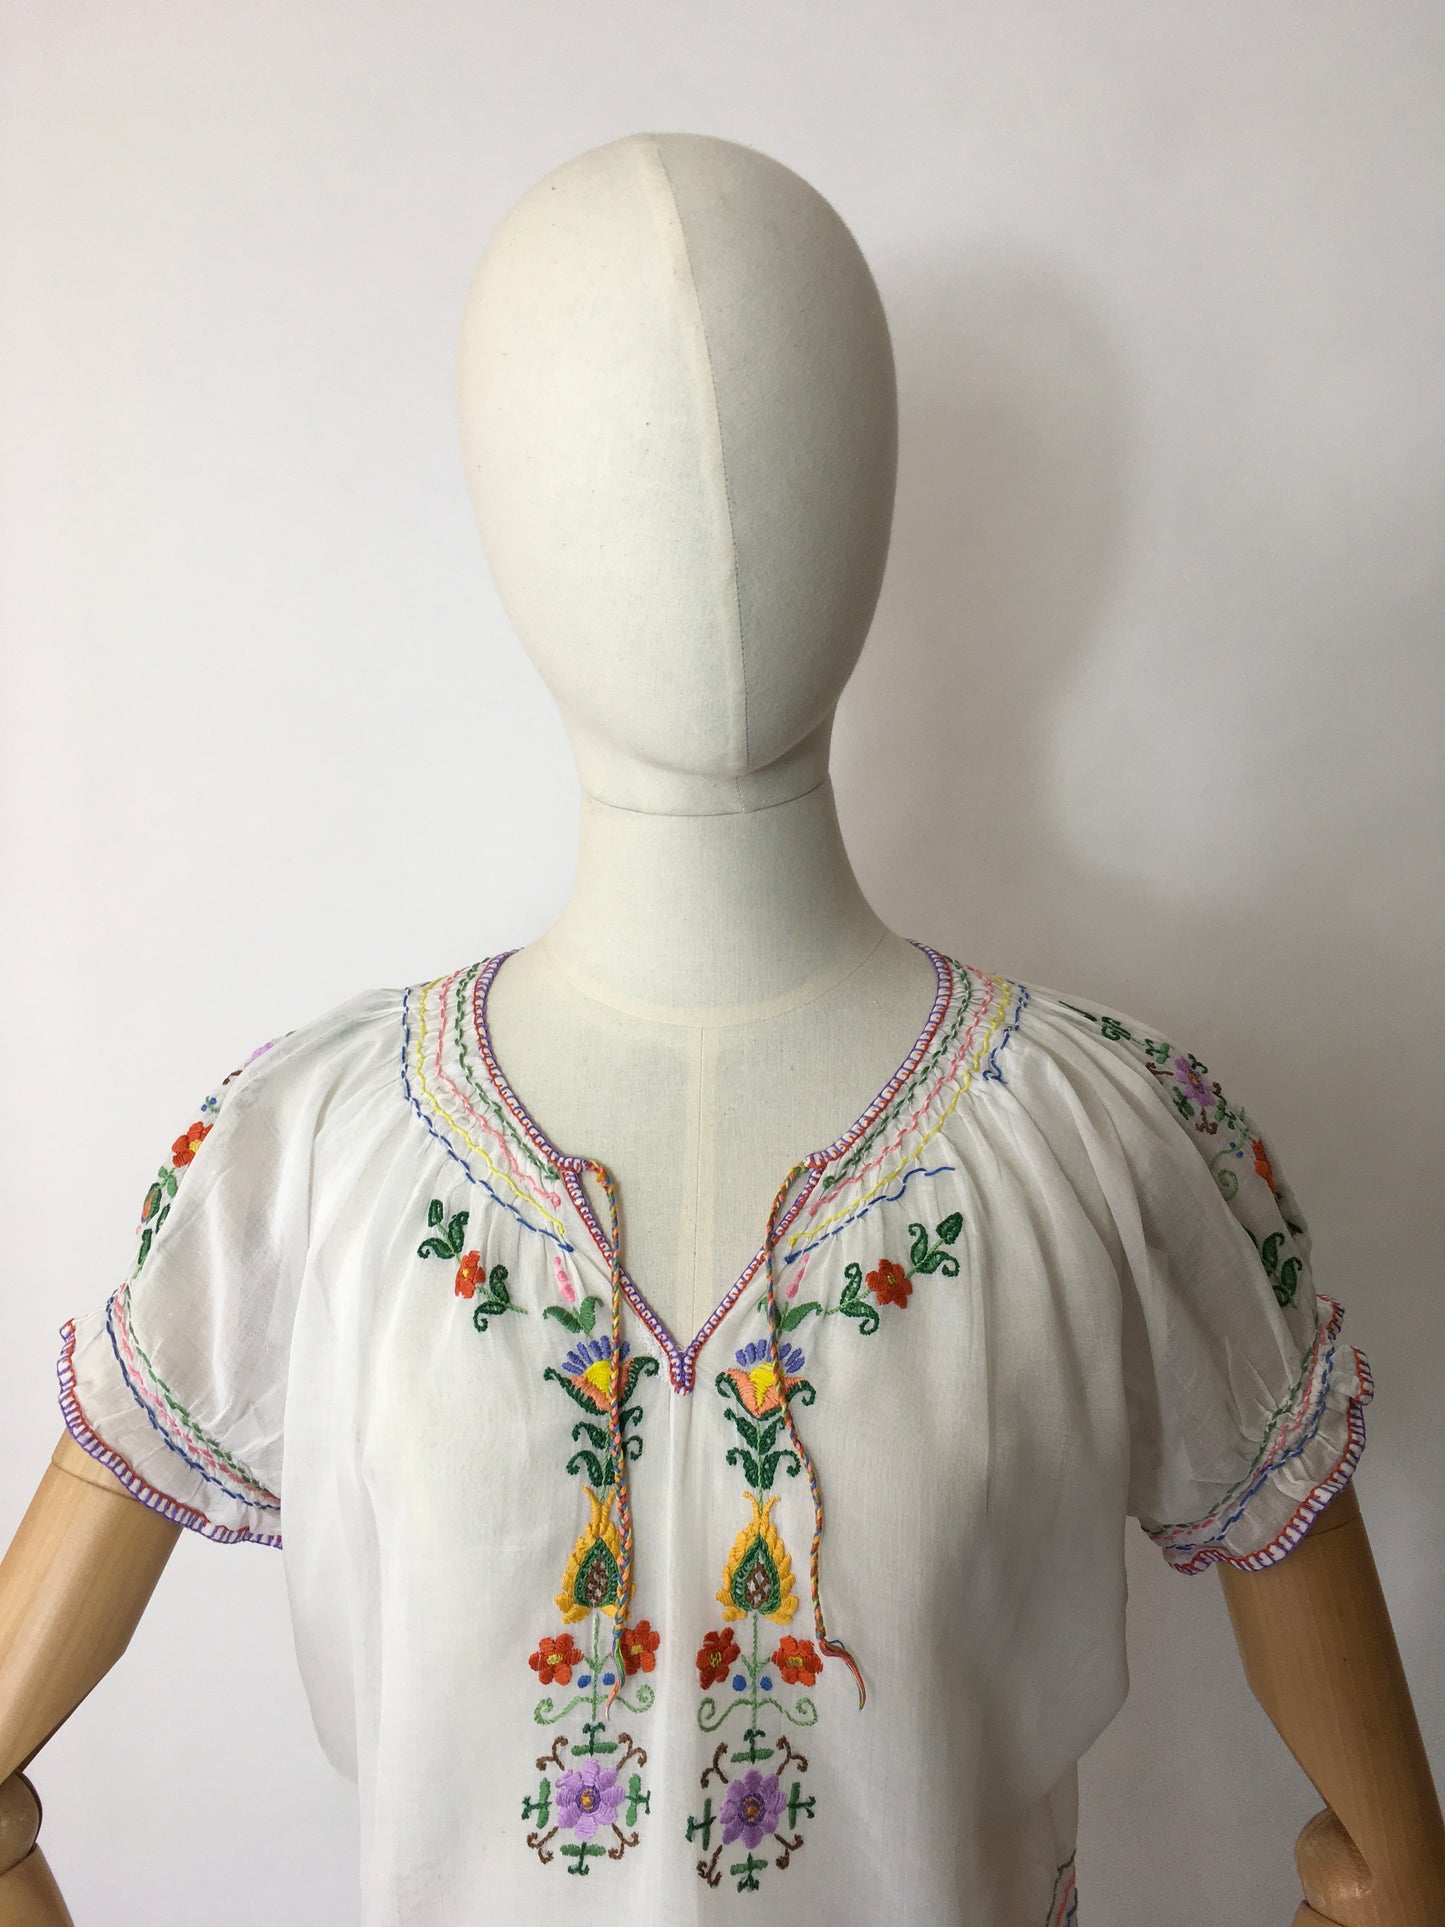 Original 1940’s Embroidered Blouse - Featuring Beautiful Embroidered Detailing in Rainbow Colours